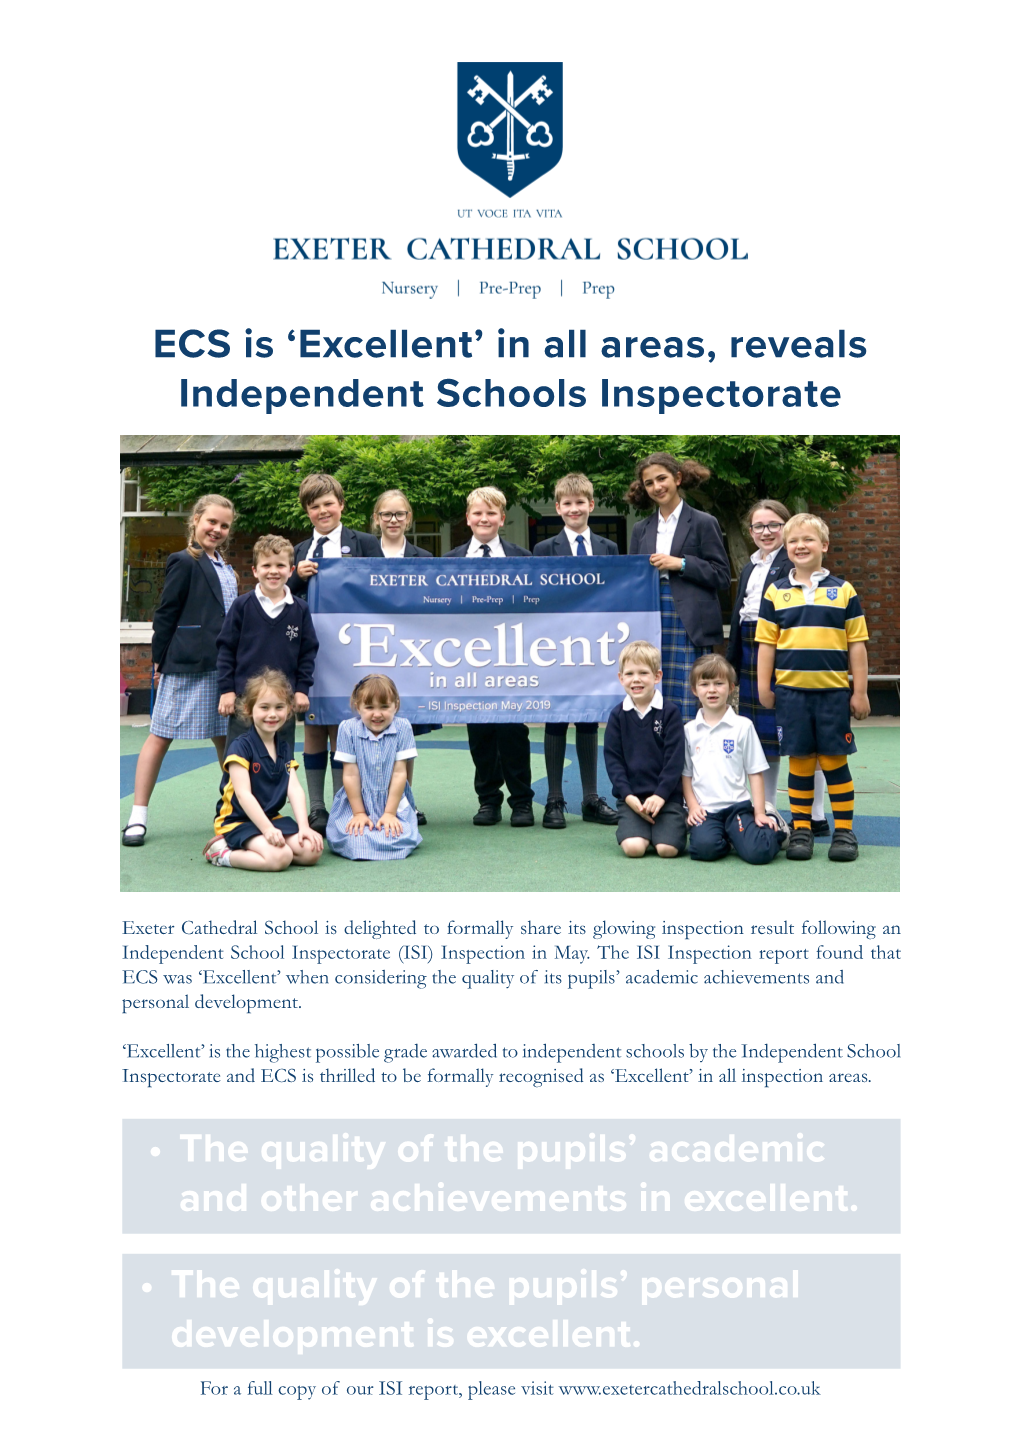 Exeter Cathedral School Is Delighted to Formally Share Its Glowing Inspection Result Following an Independent School Inspectorate (ISI) Inspection in May